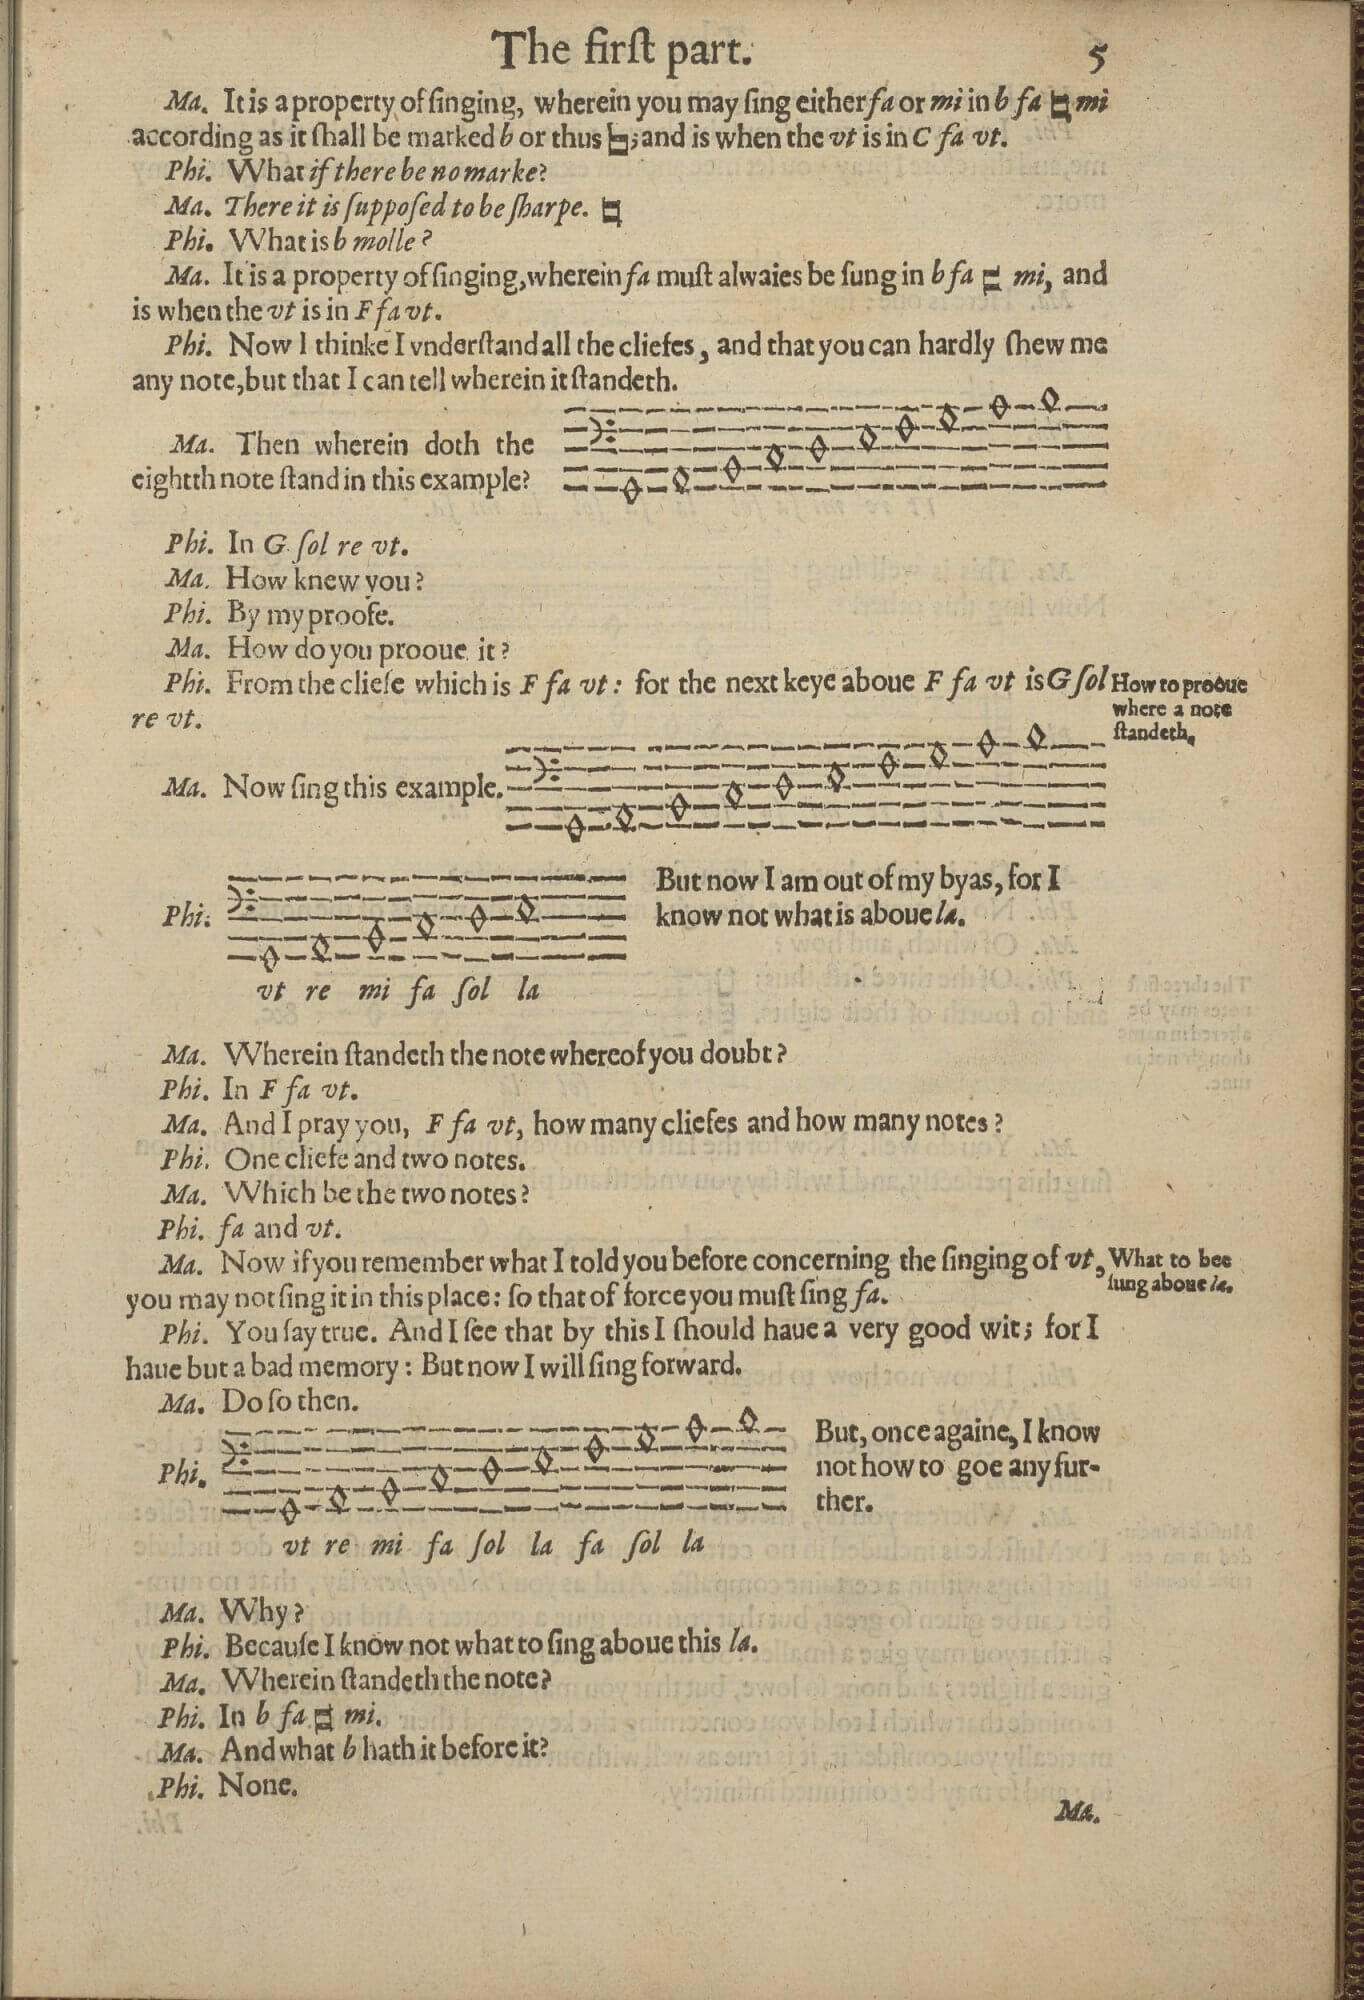 Letterpress music was printed using metal pieces of type, so that music was easily able to be set and printed on the same press and at the same time as text. The downside, however, was that the lines of the staves were uneven, since separate pieces of type were needed to make a single line.